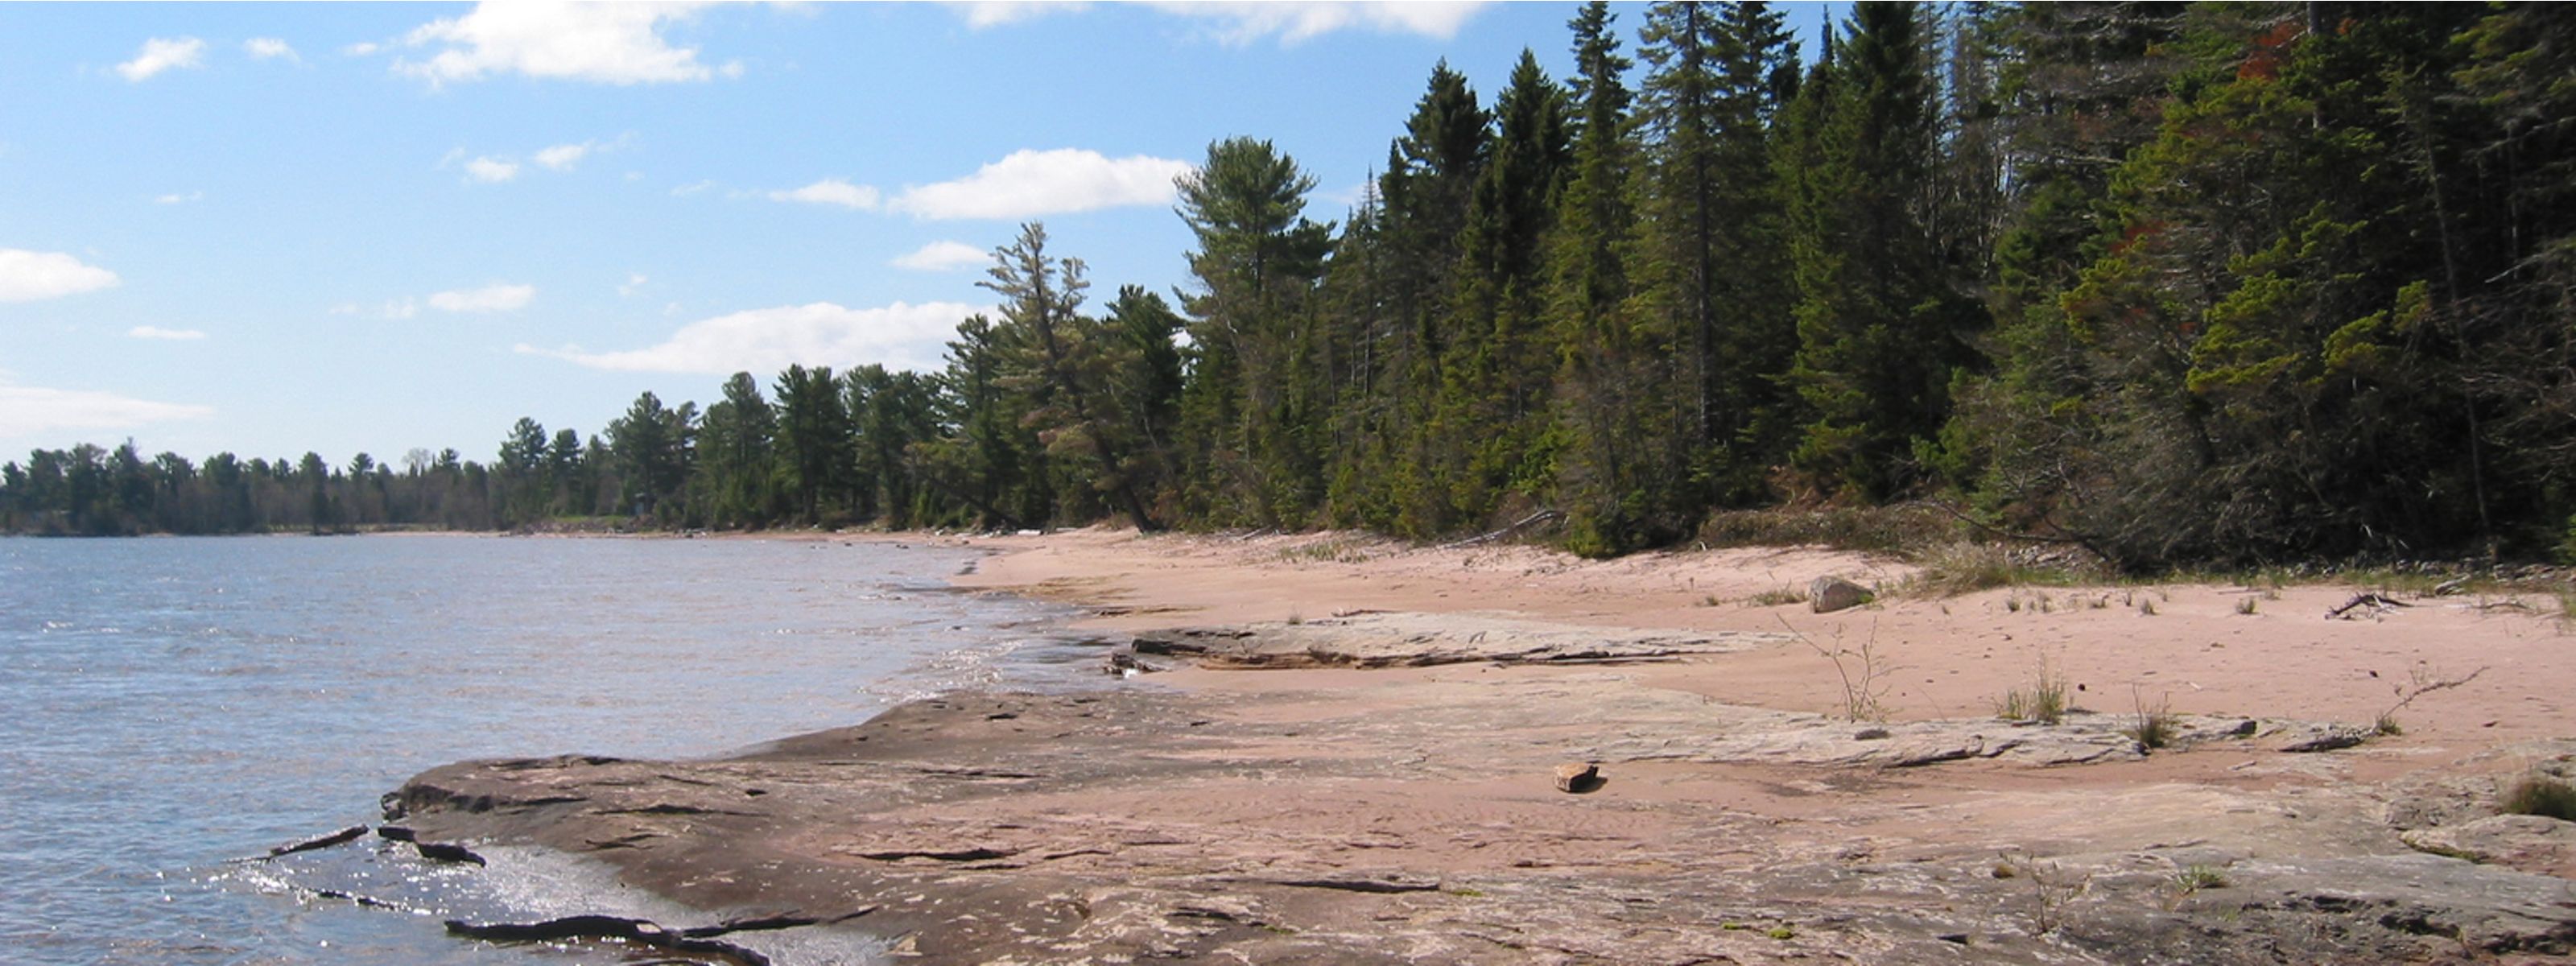 View of a rocky and sandy shoreline of a large body of water with forests along its banks.